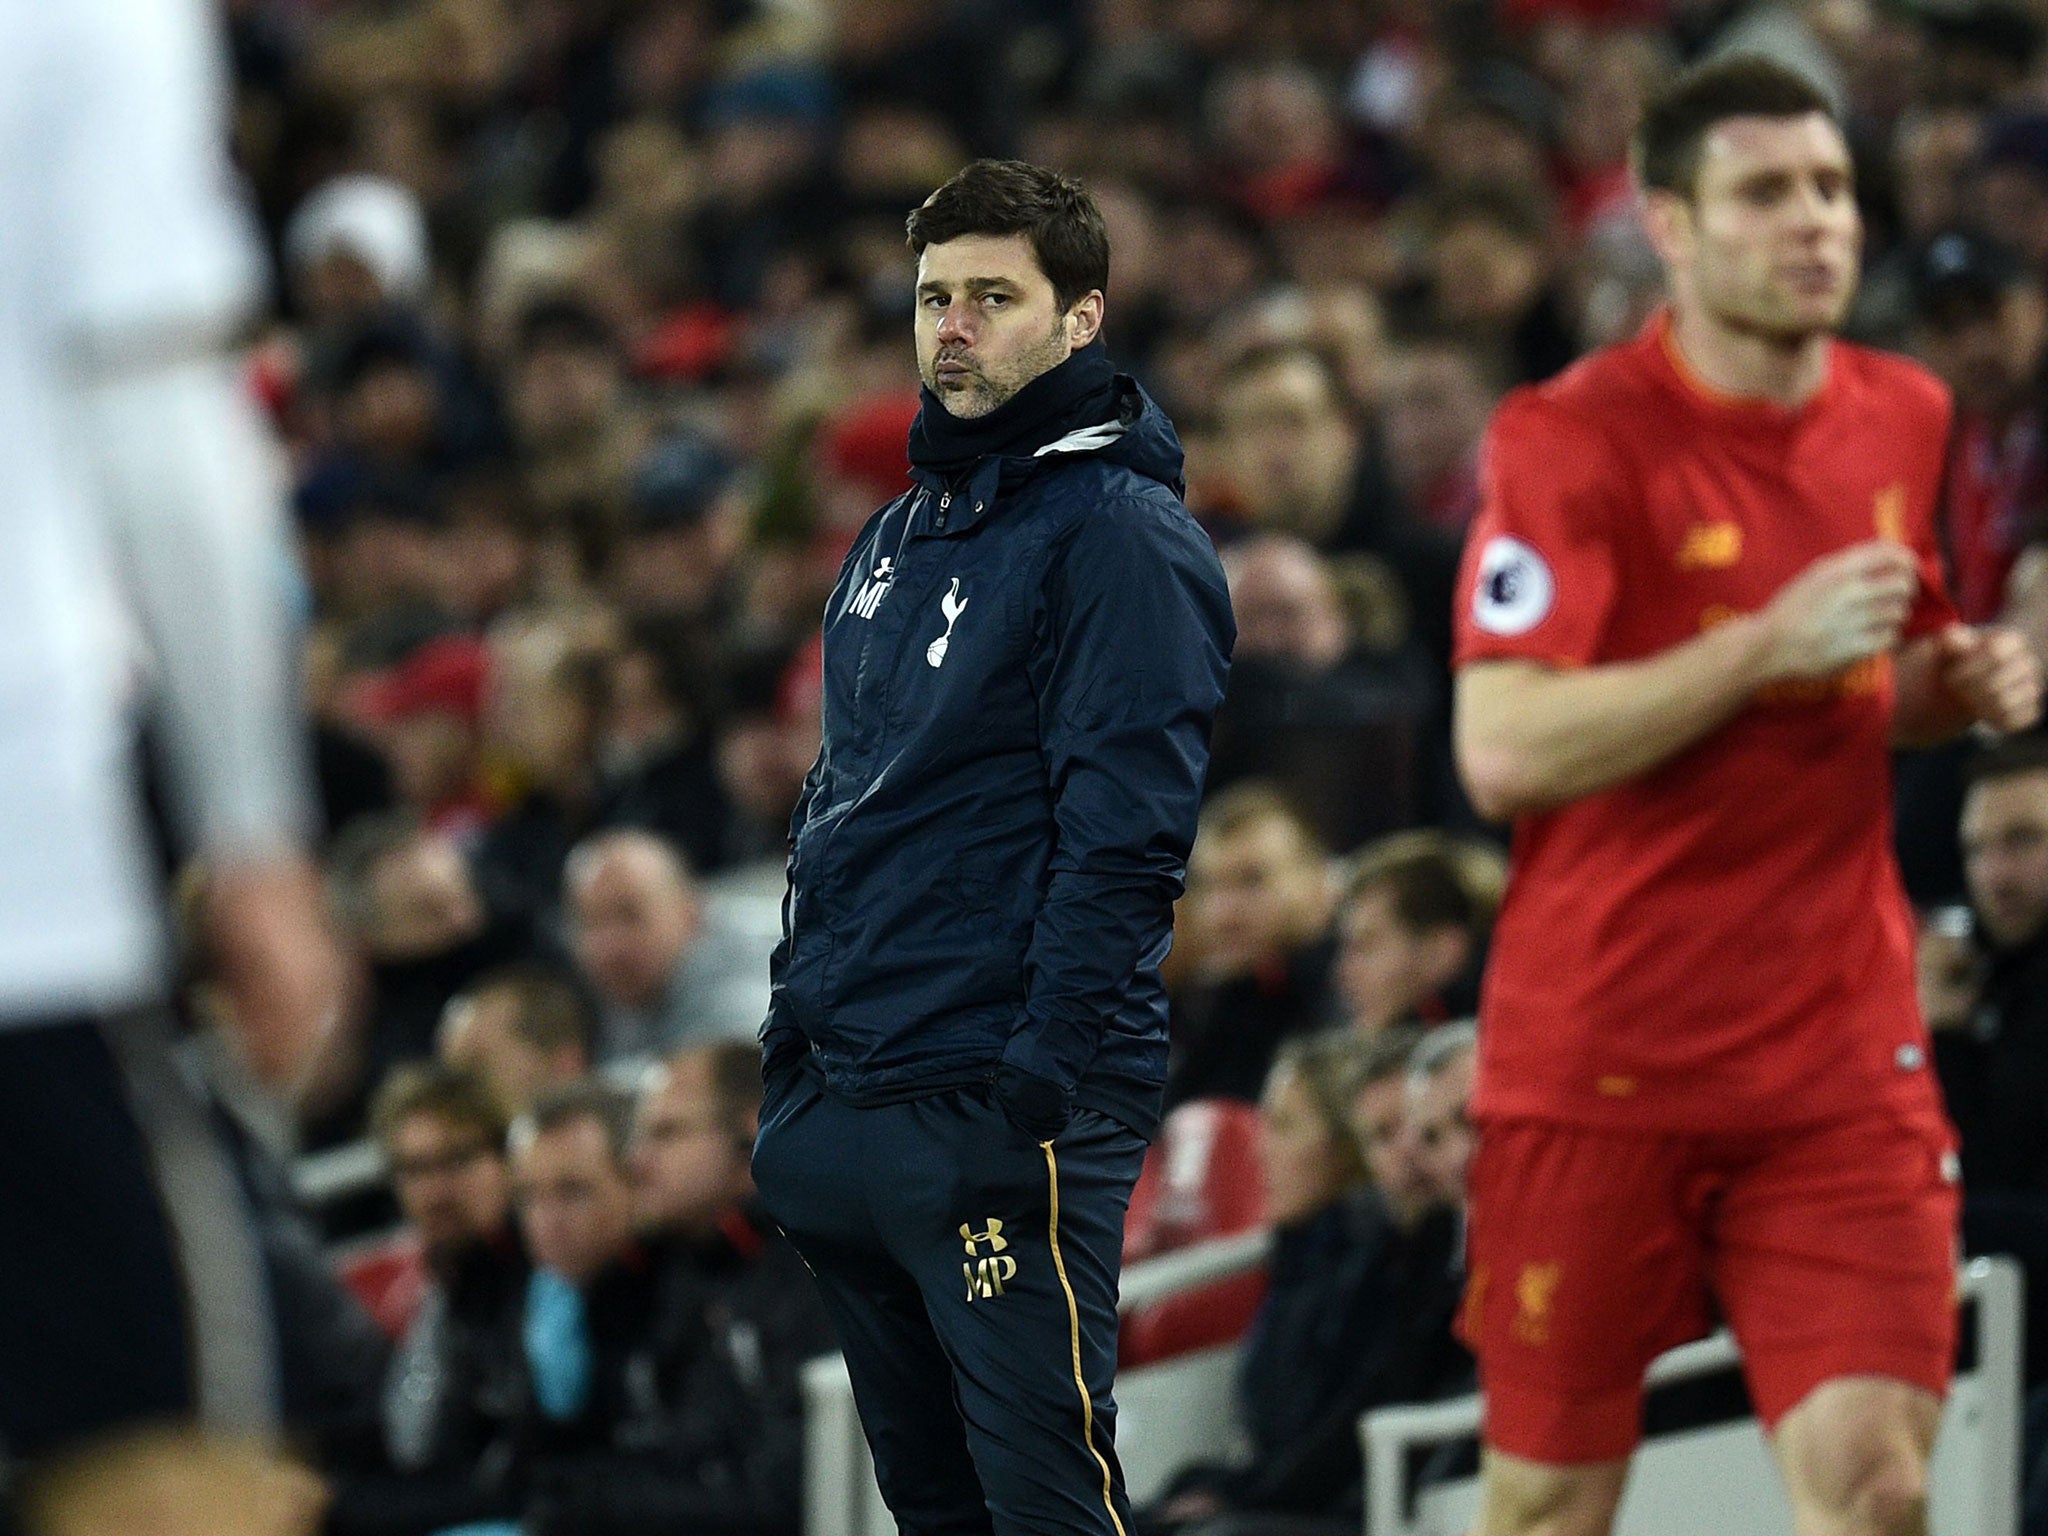 Pochettino's tactics came up short on Saturday as his side were comfortably beaten by Liverpool